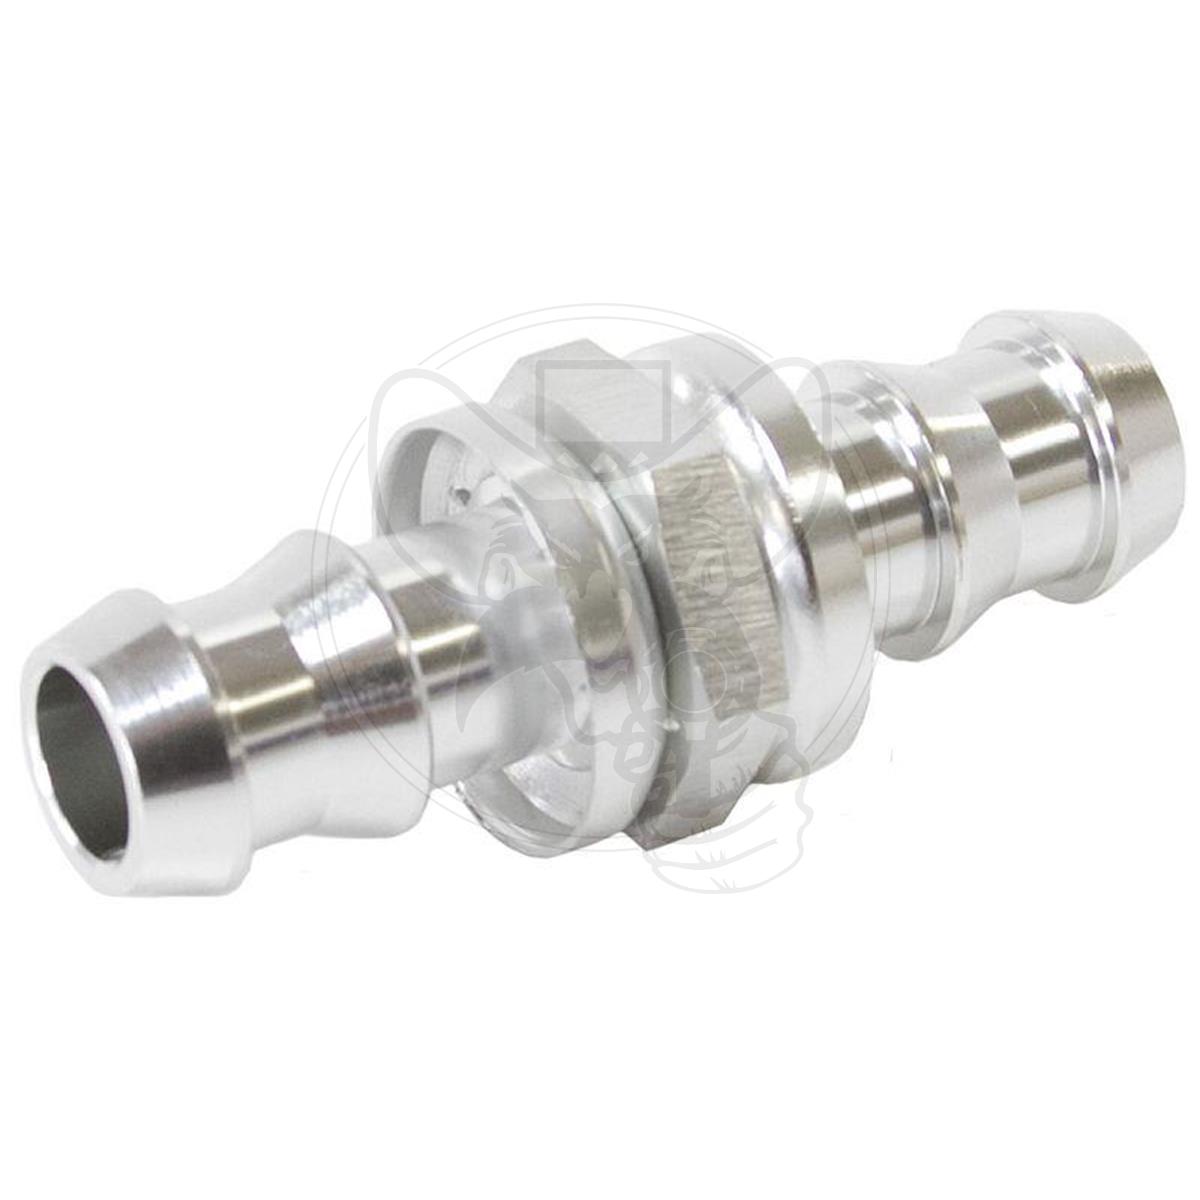 AEROFLOW -10 MALE TO -10 MALE BARB PUSH LOCK ADAPTER - SILVER